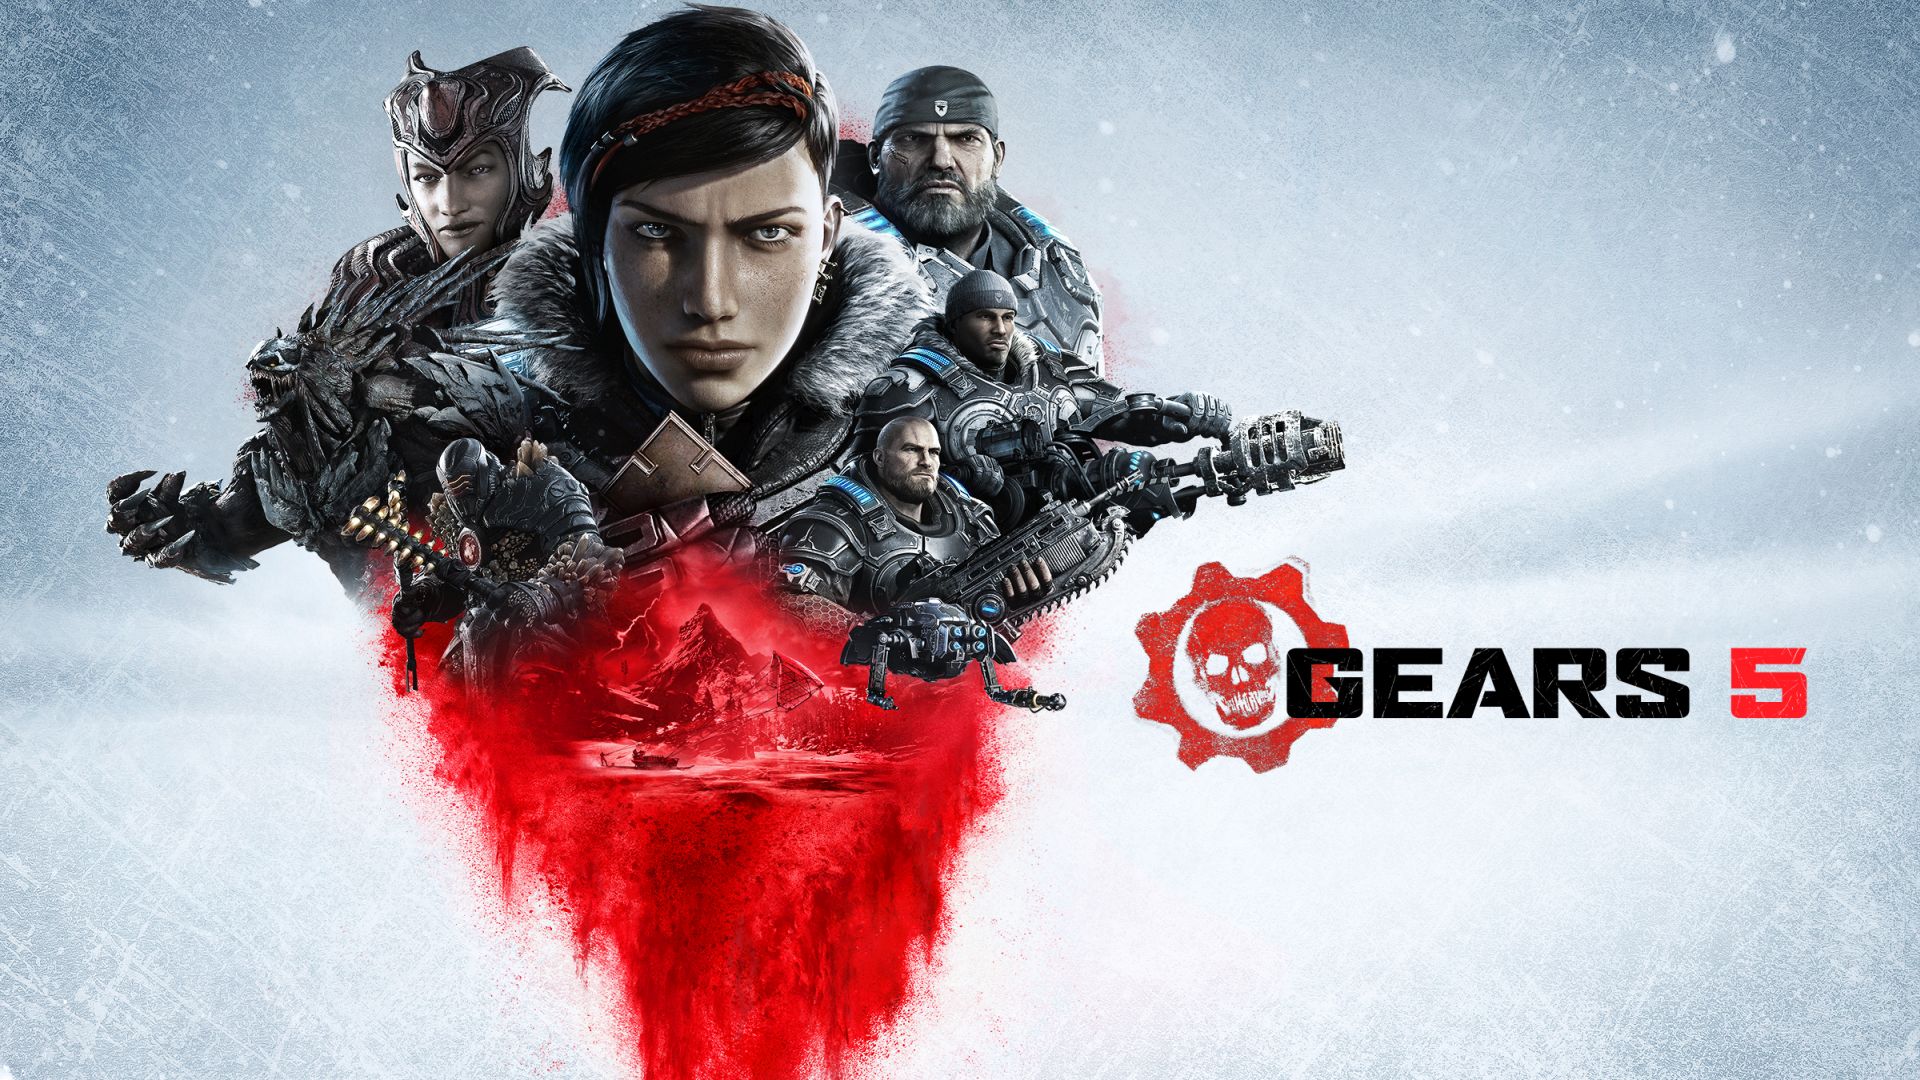 Gears 5 Showcased At E3 2019; Here Is Everything You Need To Know